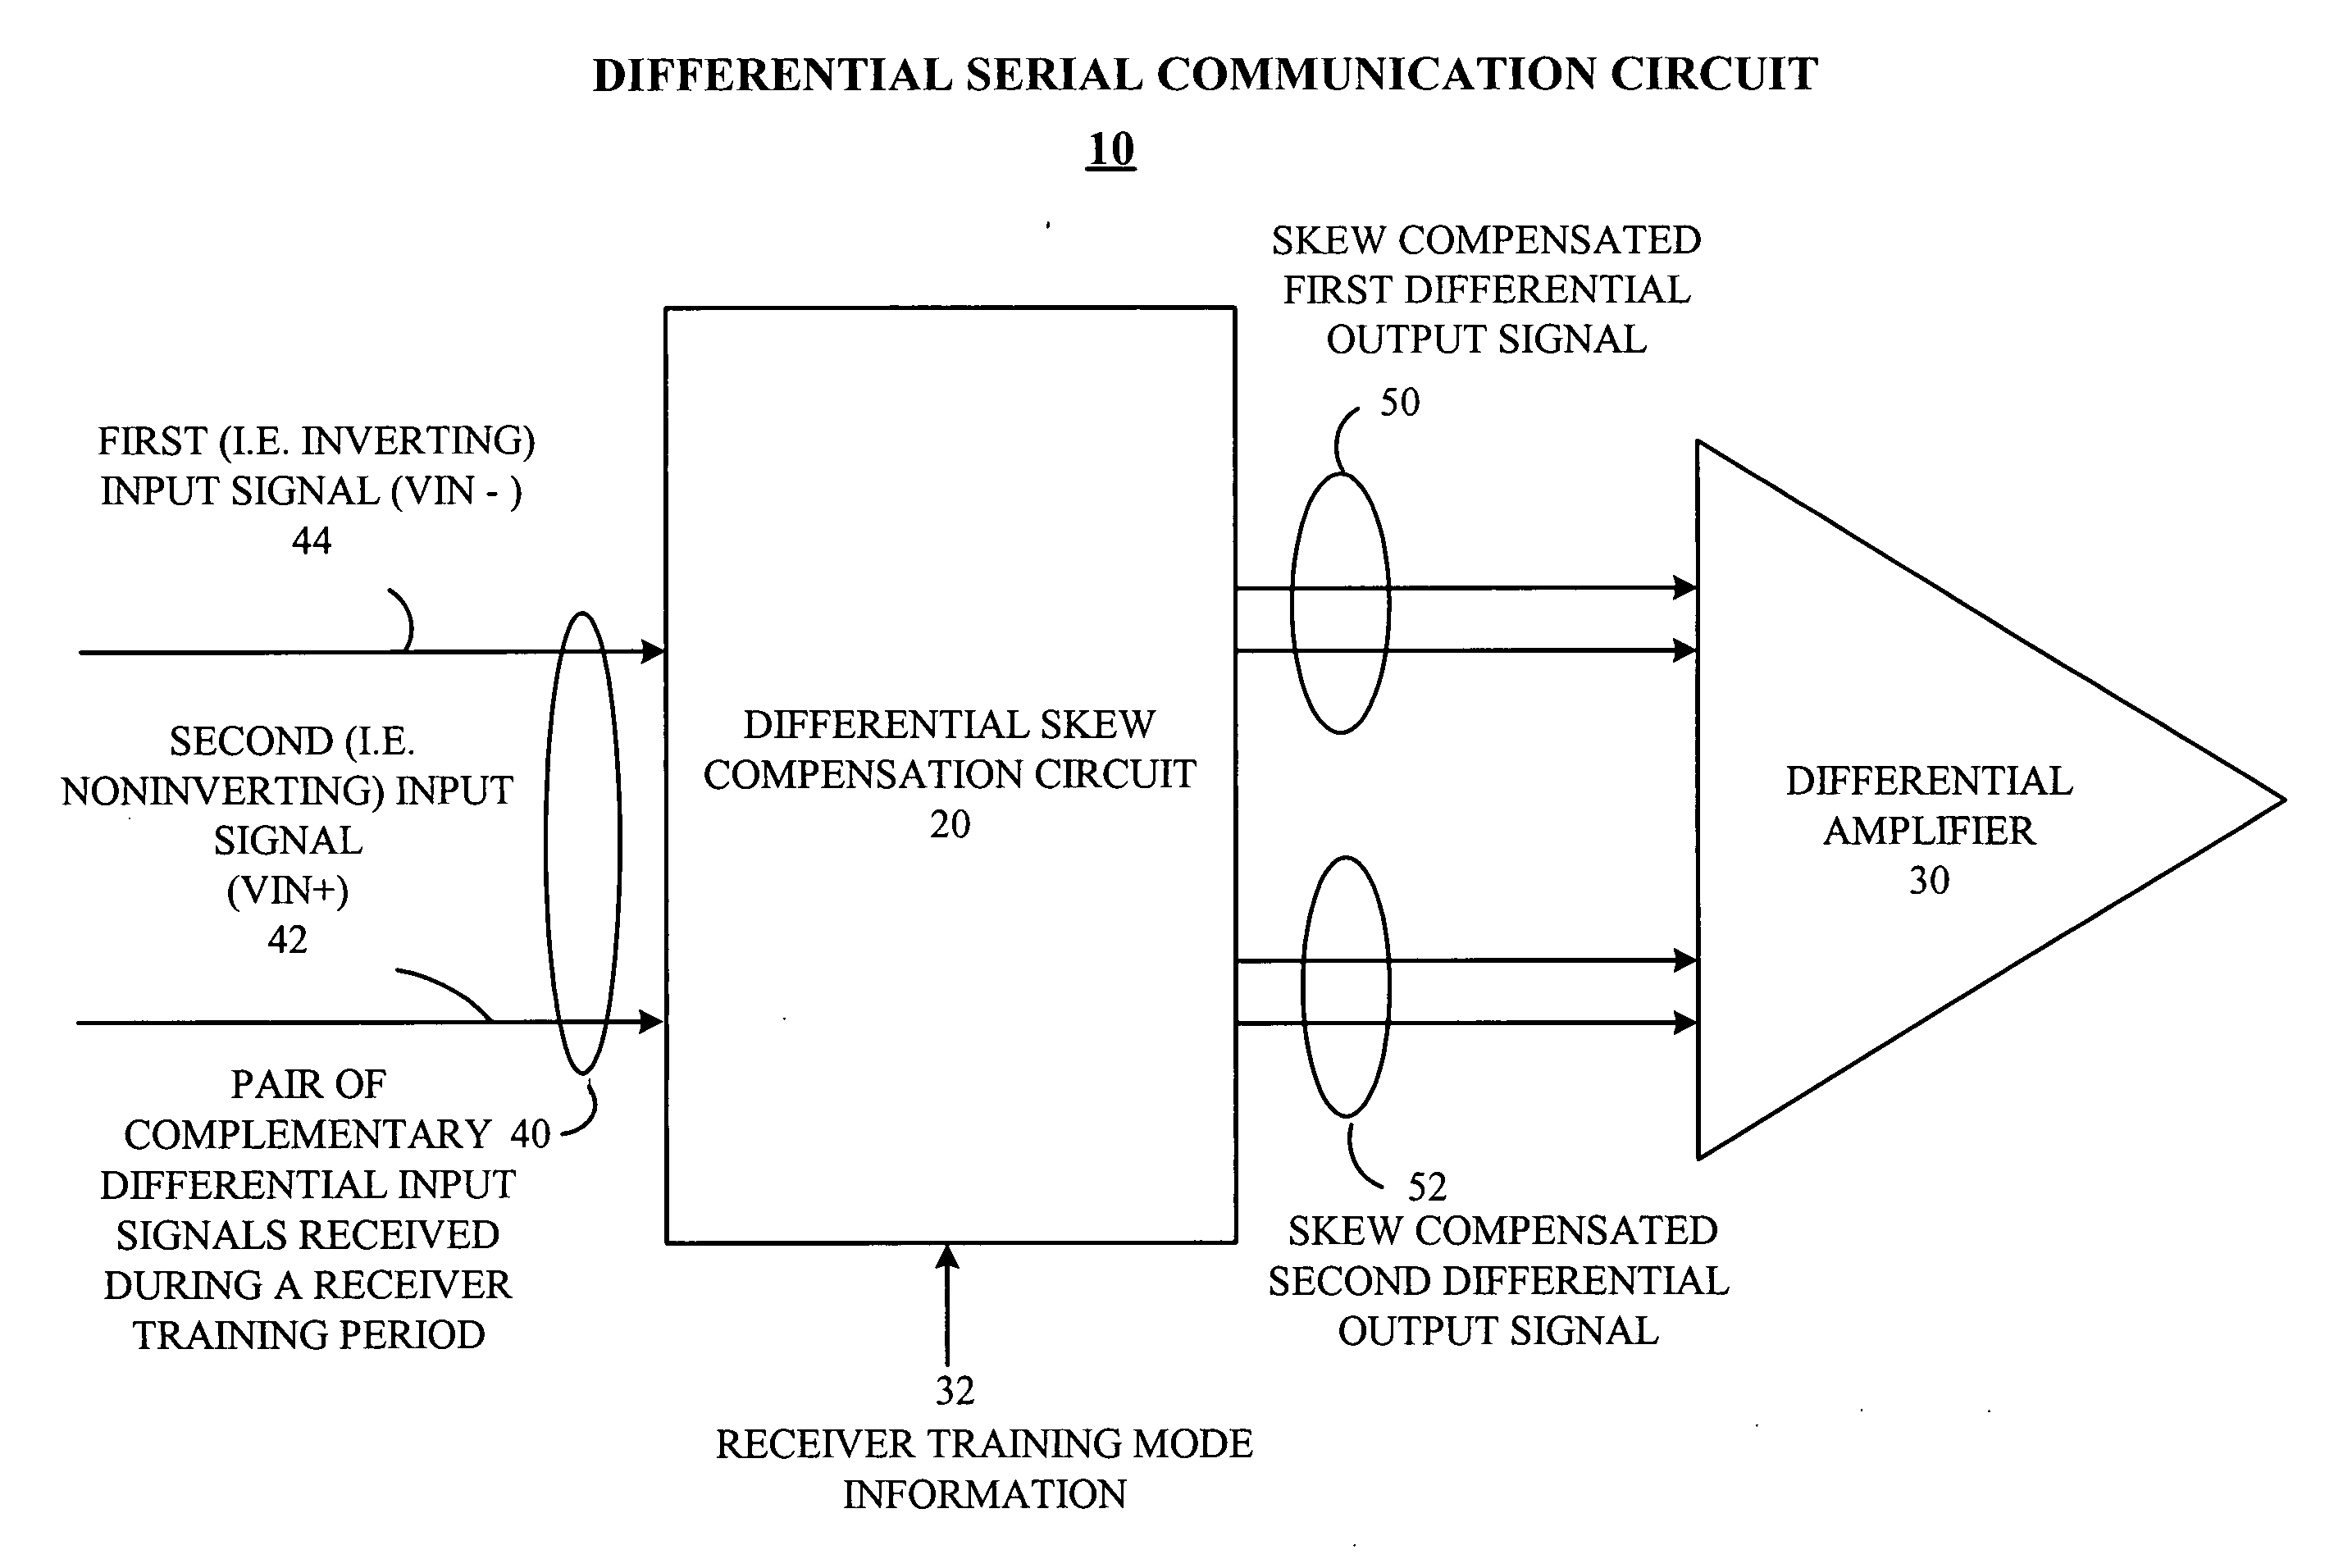 Intra-pair differential skew compensation method and apparatus for high-speed cable data transmission systems